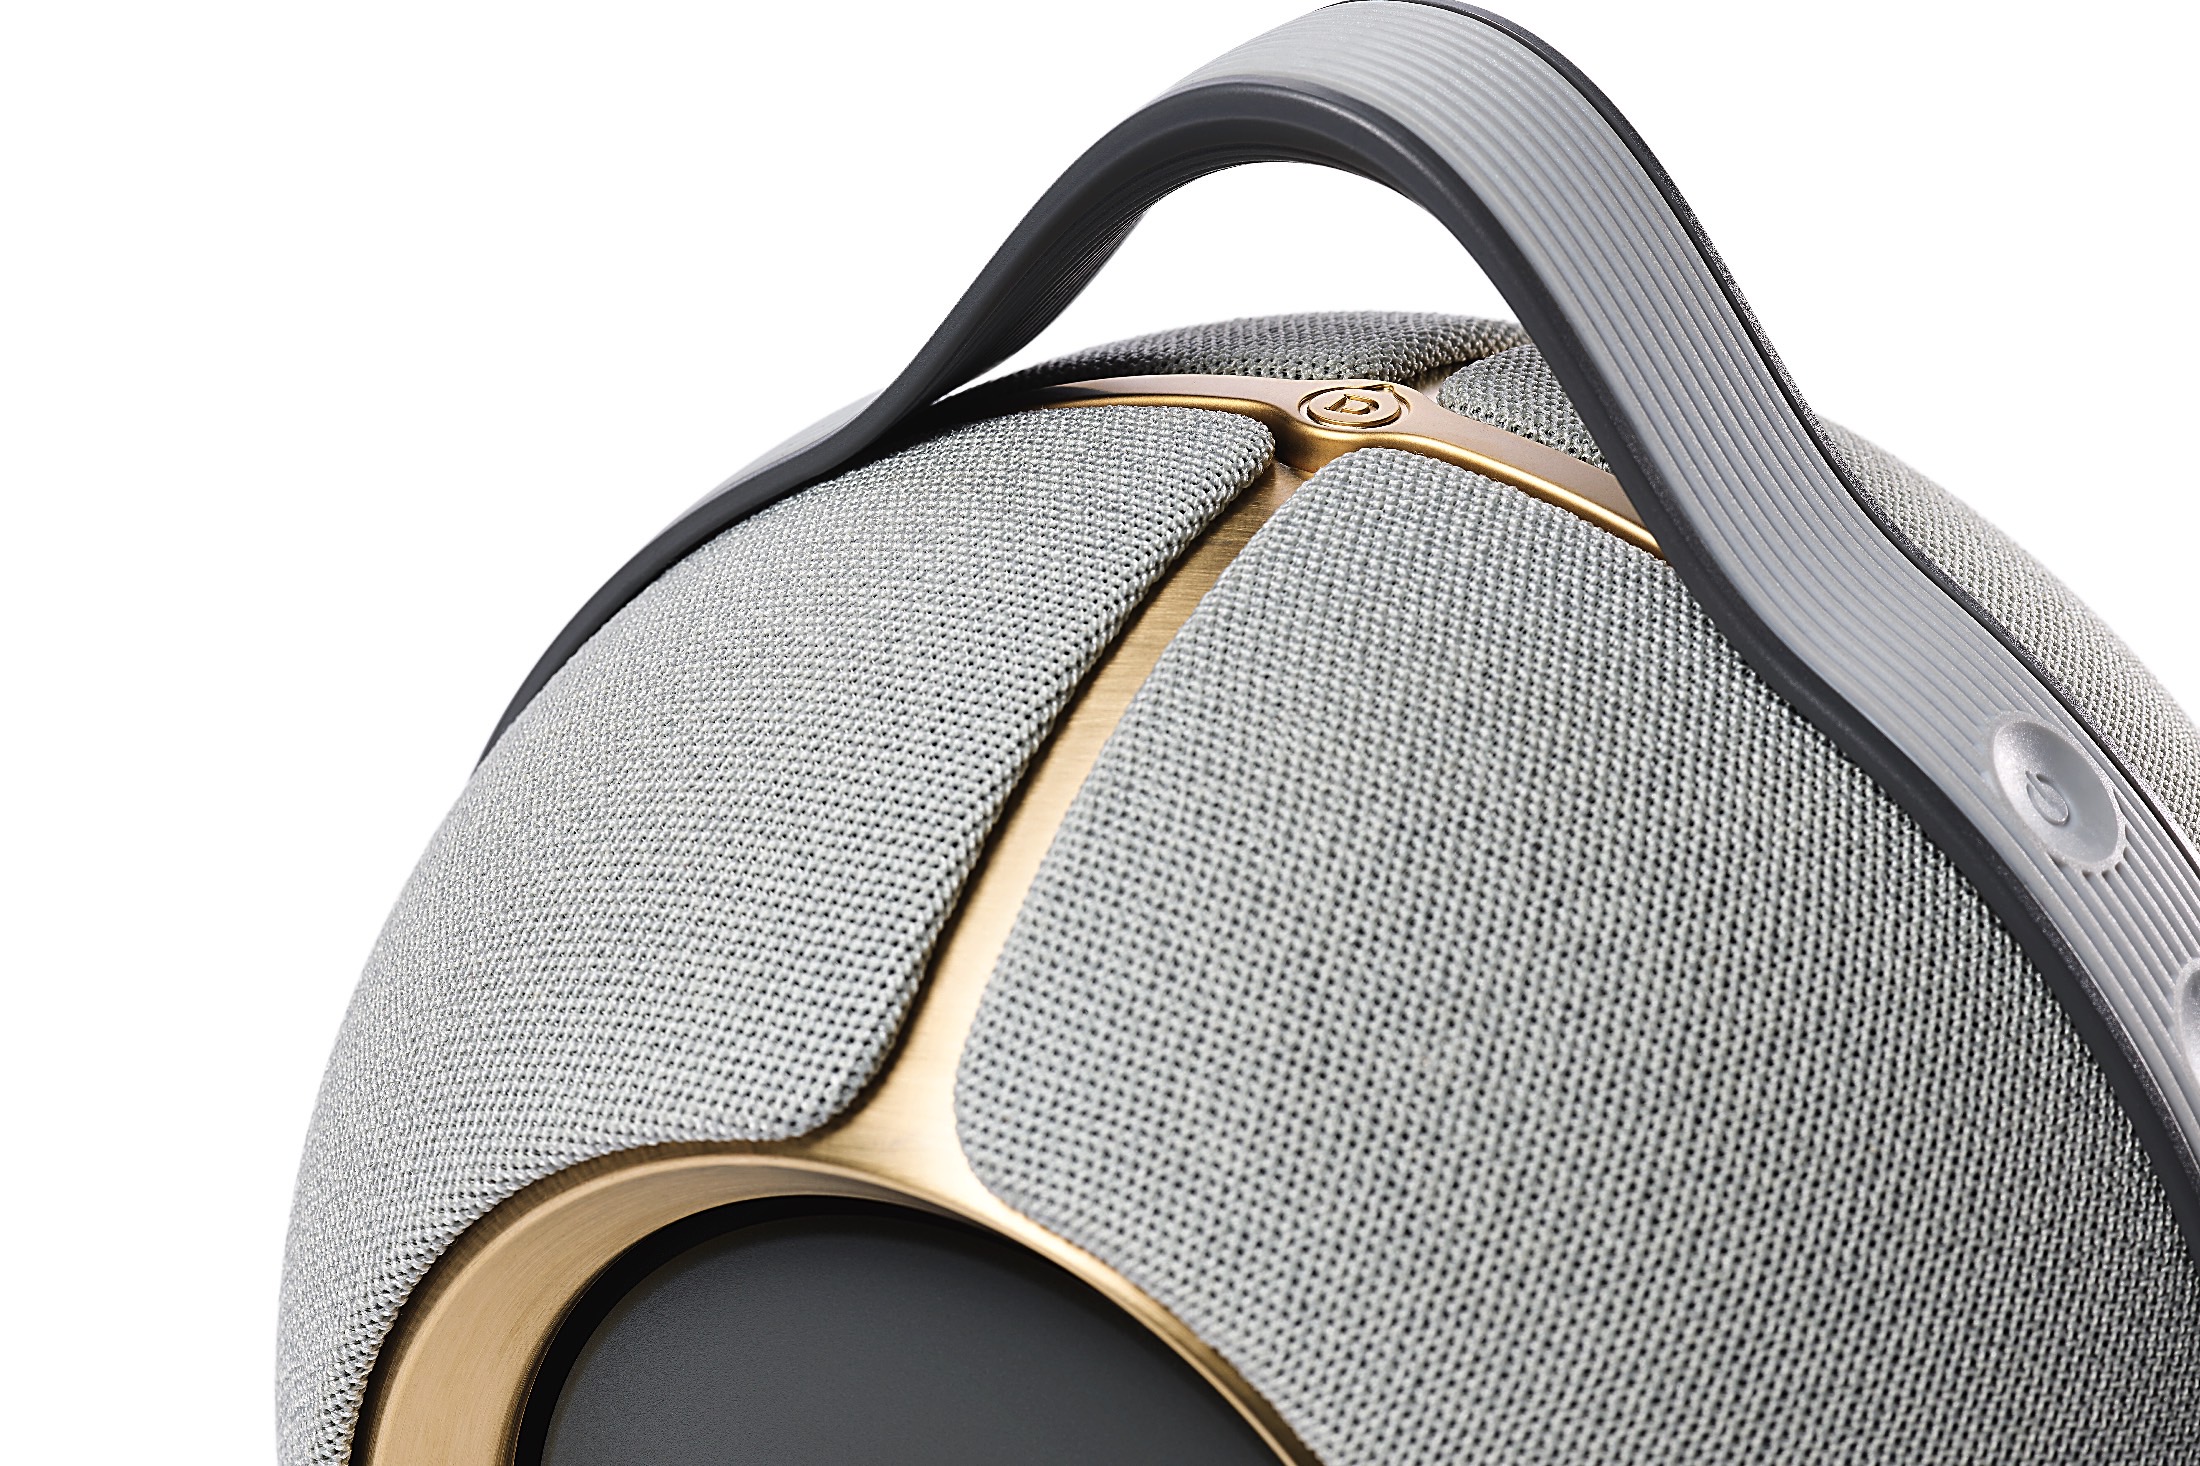 Devialet Mania review: The high-end portable speaker that's big on bass